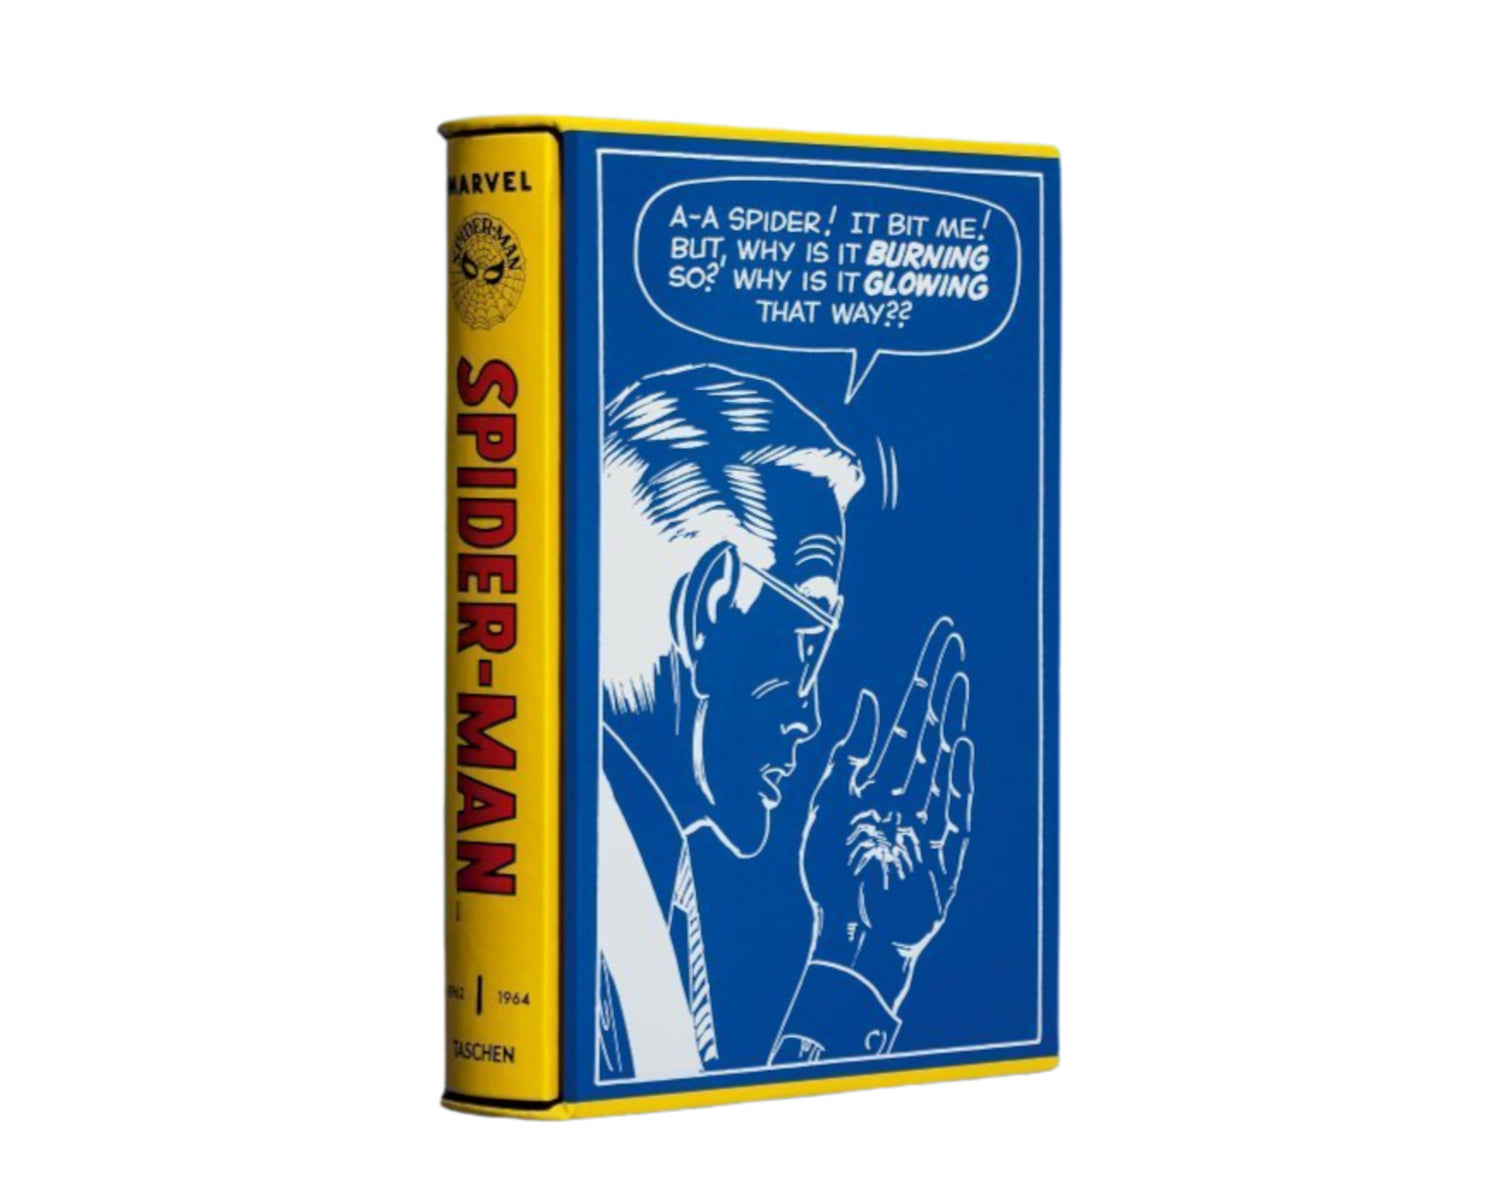 Taschen Books - Marvel Comics Library - Spider-Man. Vol. 1. 1962–1964 - Edition of 1,000 Hardcover Book